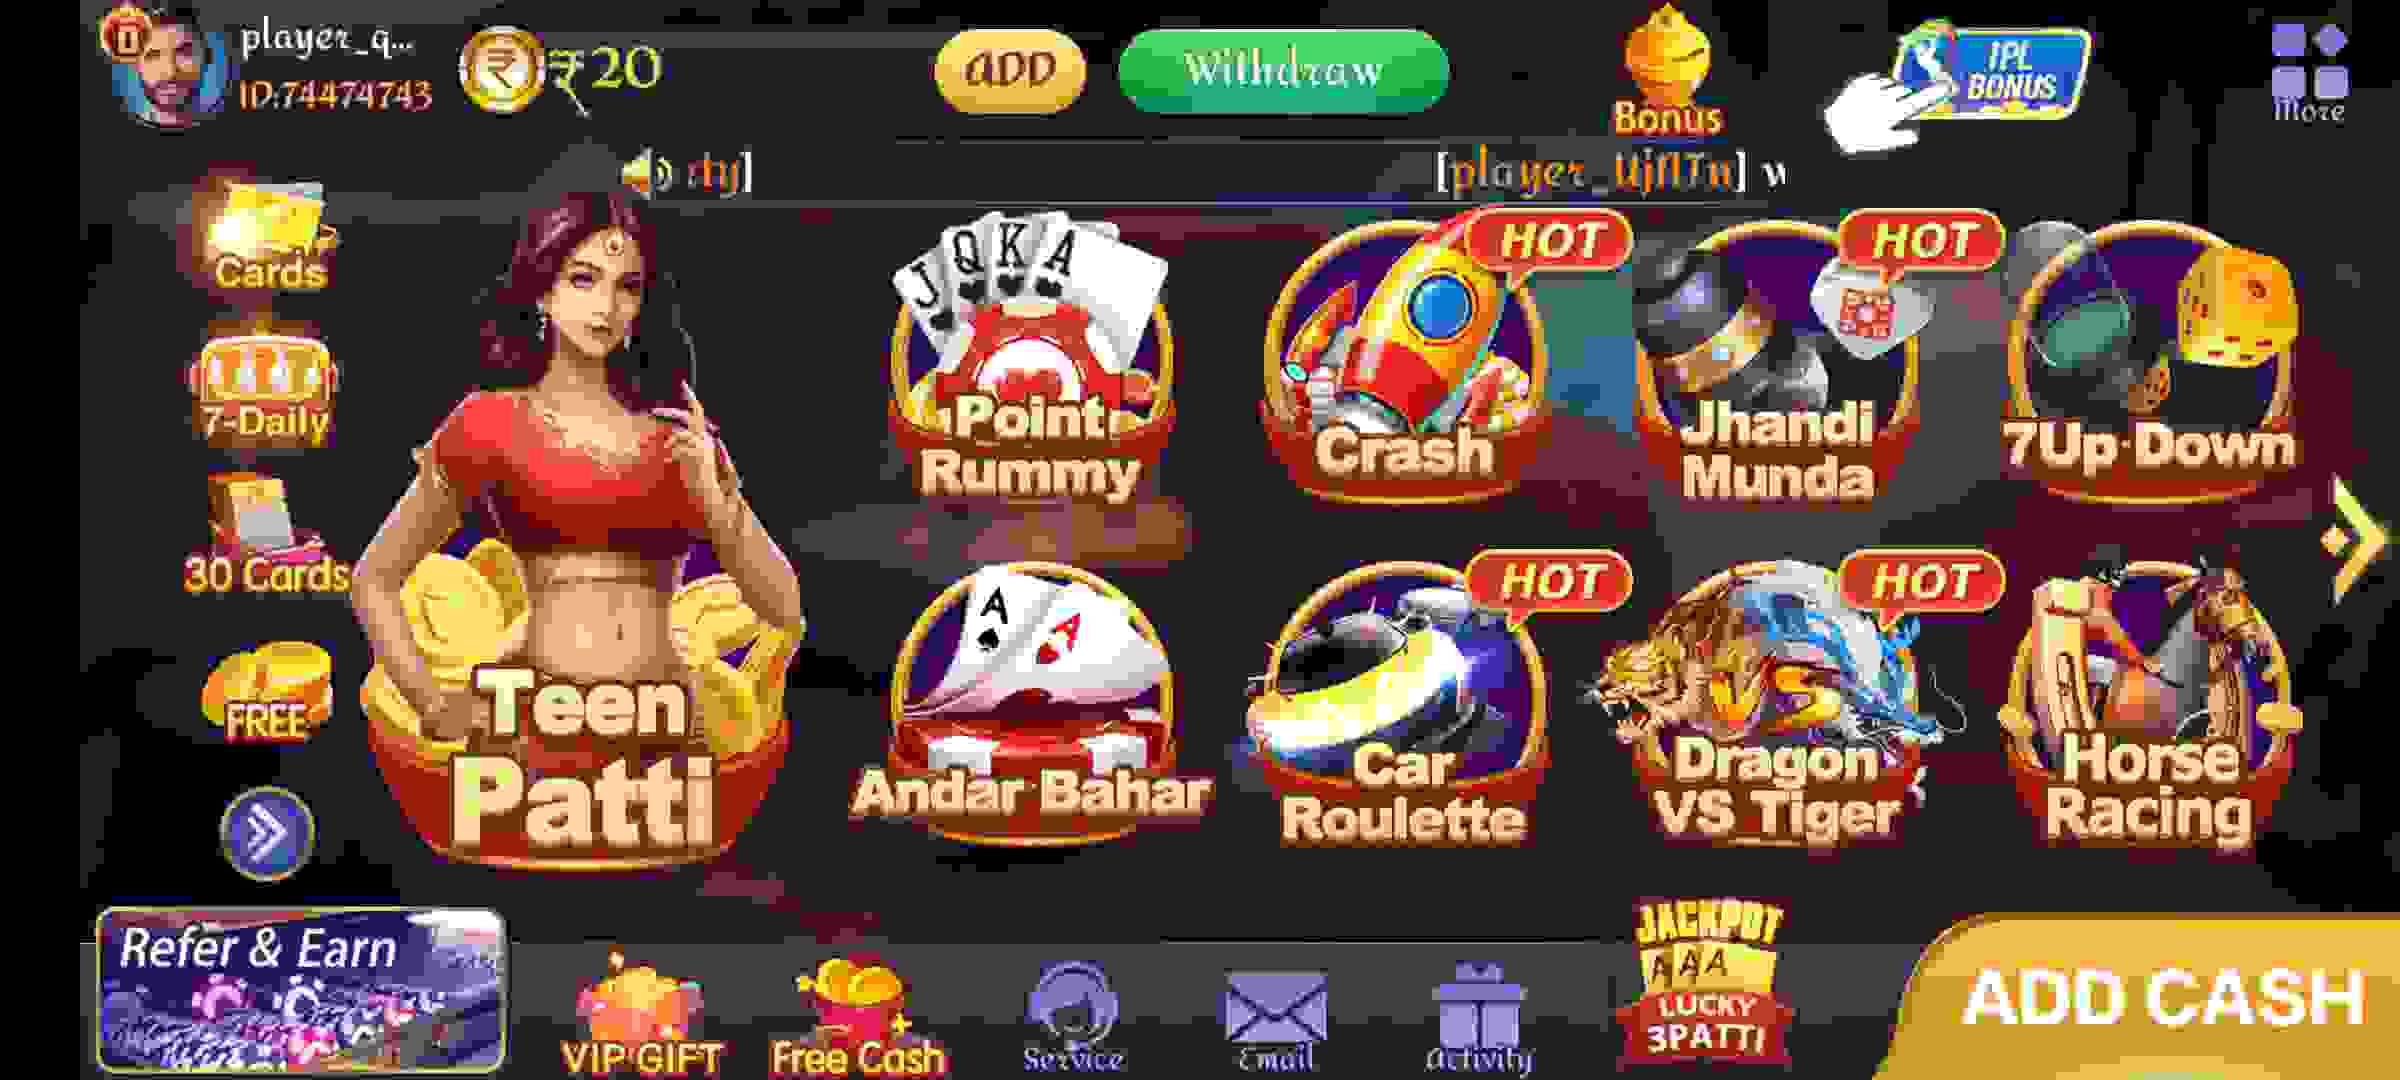 download teen patti master apk and win unlimited money download link is given teen patti master apk